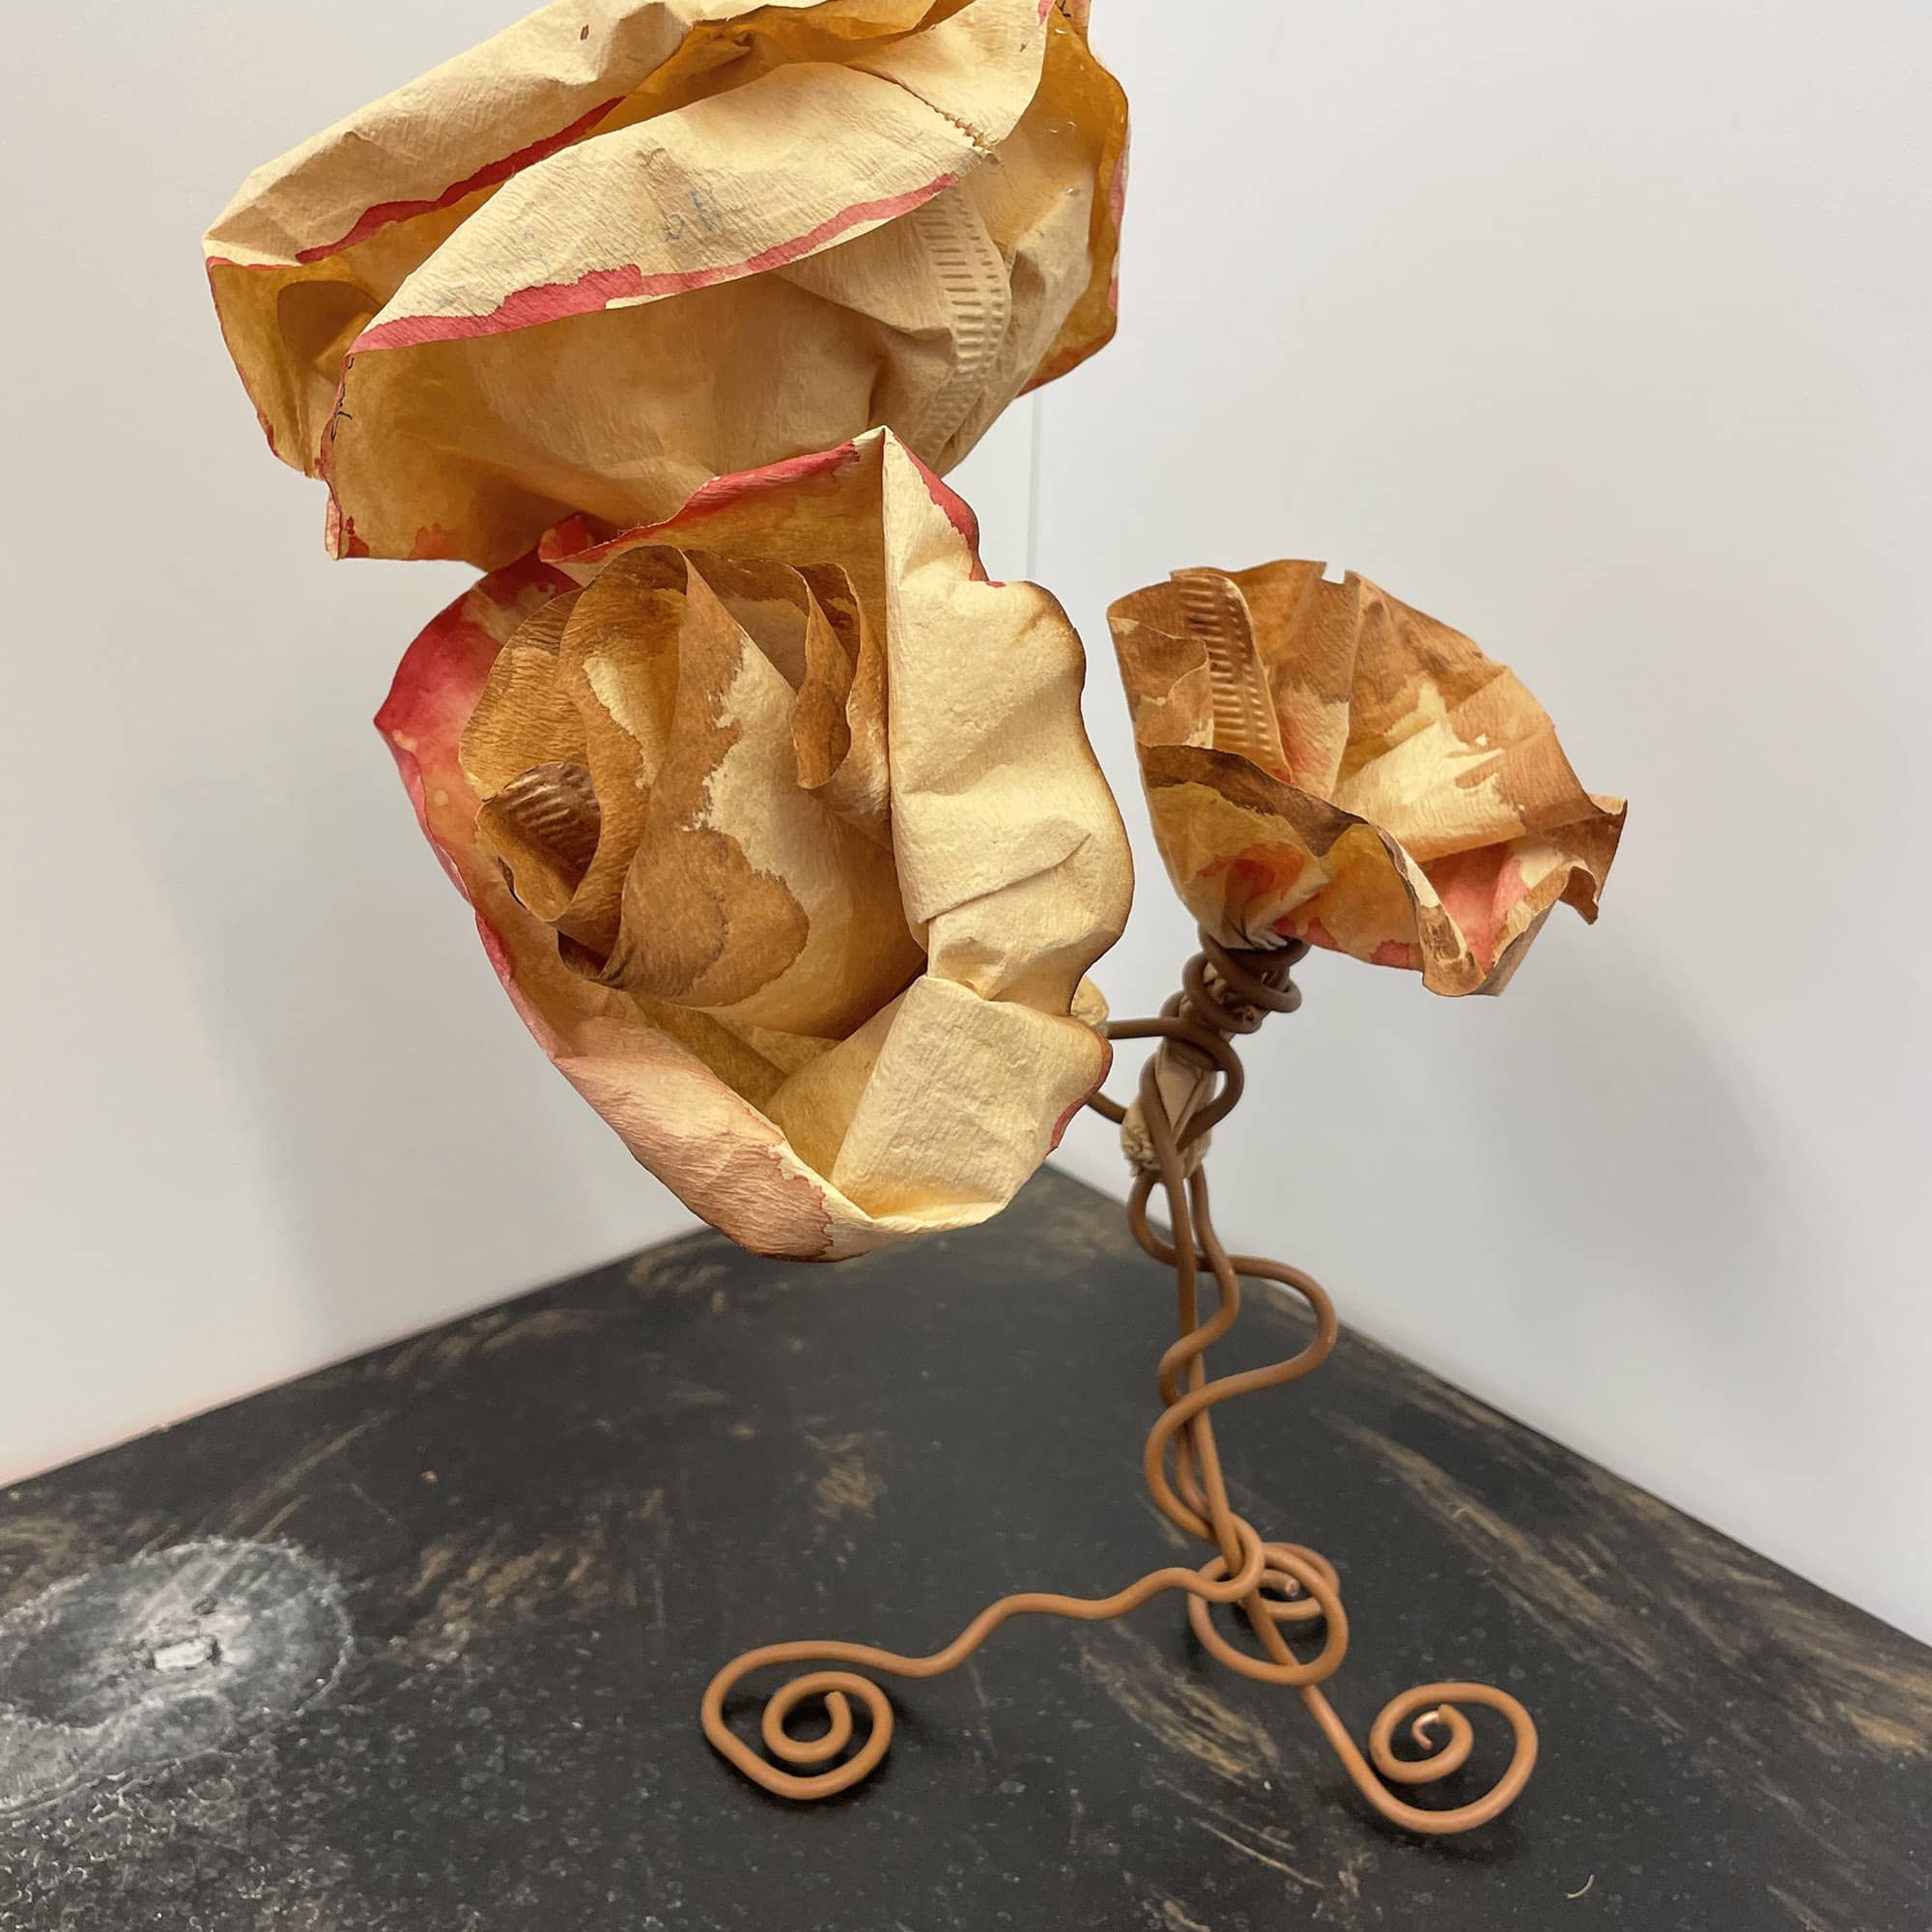 Expositie: Used coffee filter mail art project @ NO ART FASHION